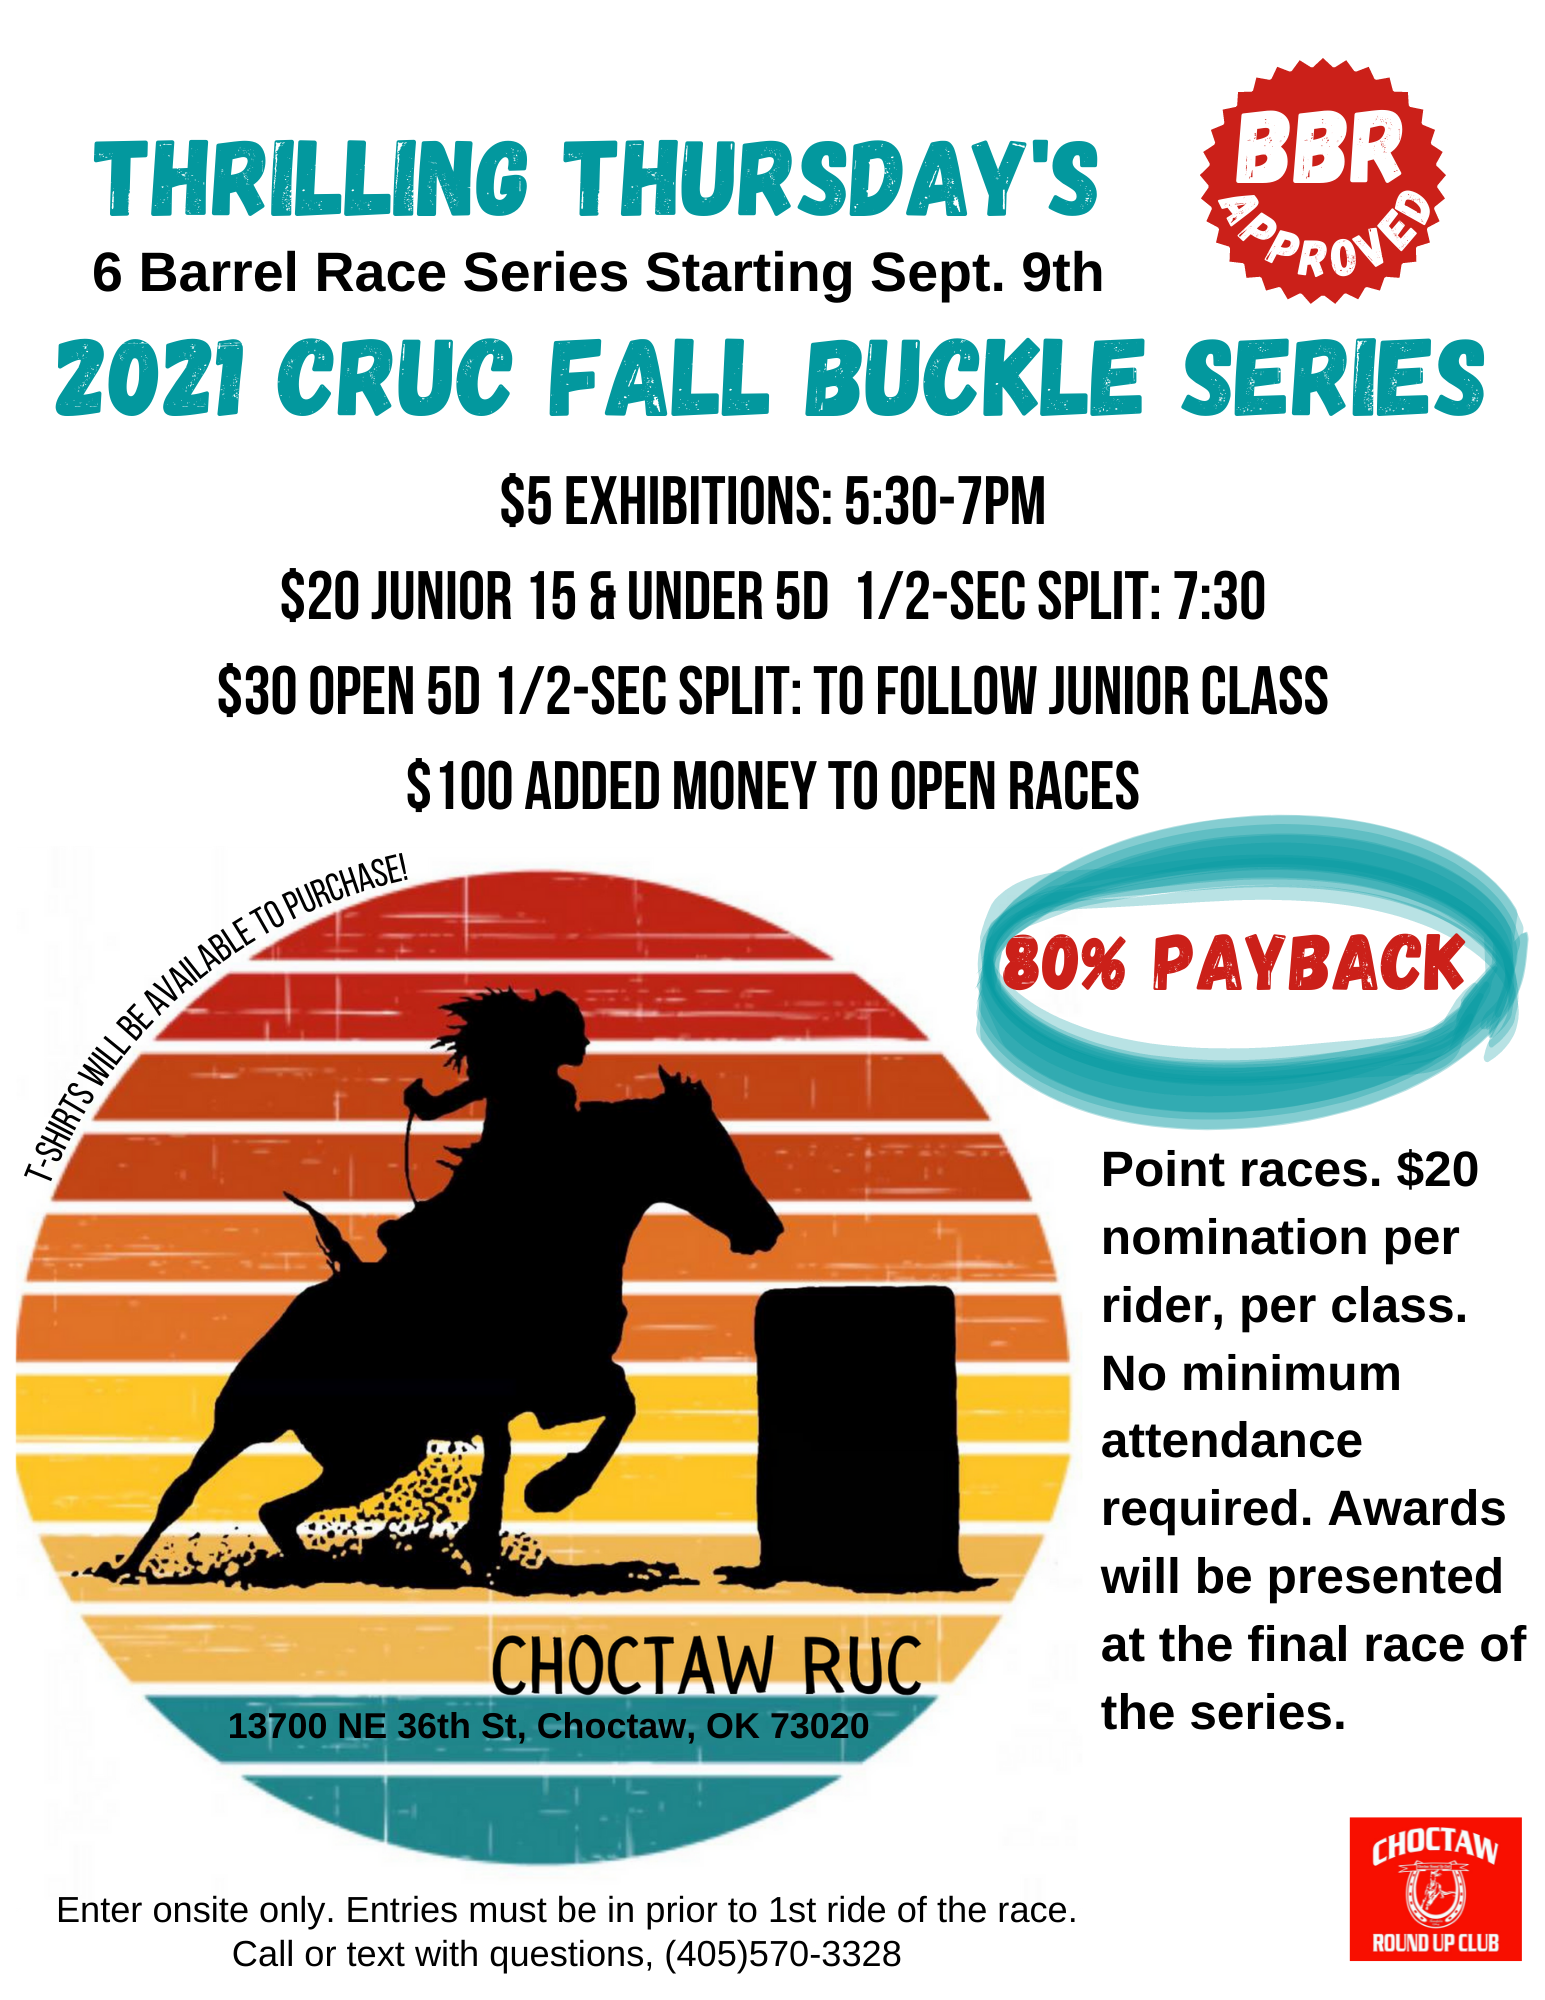 Thrilling Thursday's 2021 CRUC Fall Buckle Series $100 added money